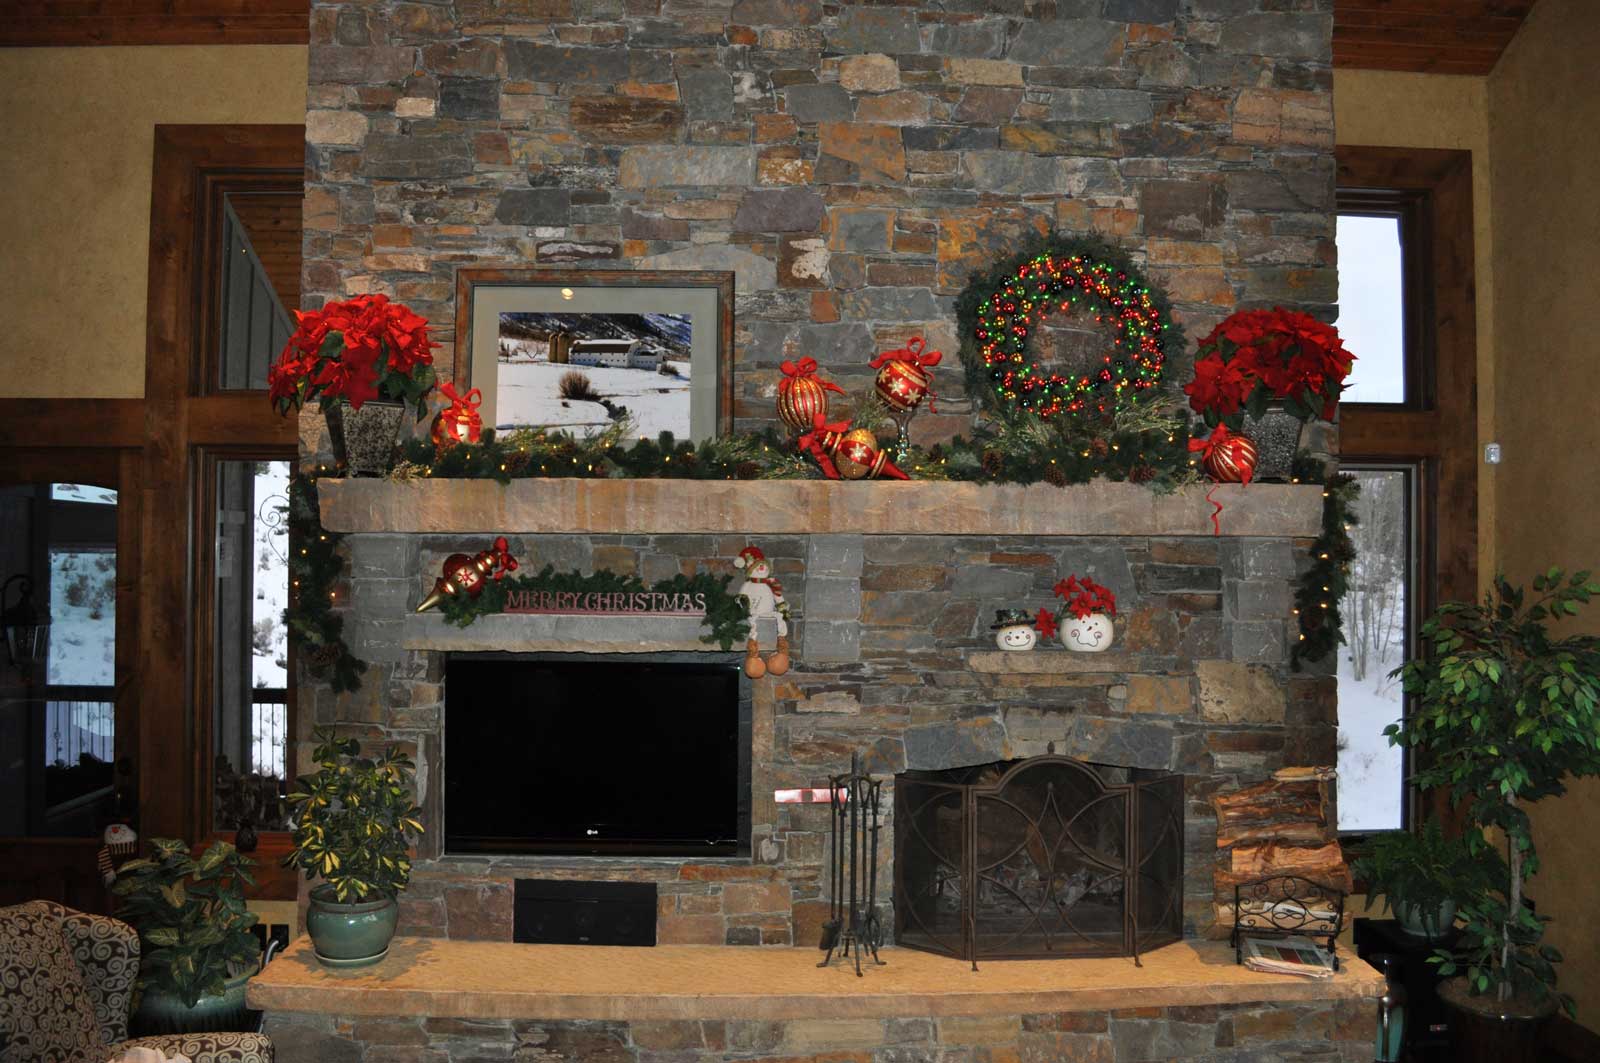 And Accessories Decoration Furniture And Accessories Gorgeous Fireplace Decoration And Accessories To Celebrate Wonderful Christmas With Fireplace Mantel Designs Made From Stone Decoration  Fireplace Mantel Designs With Rustic Contemporary Style 